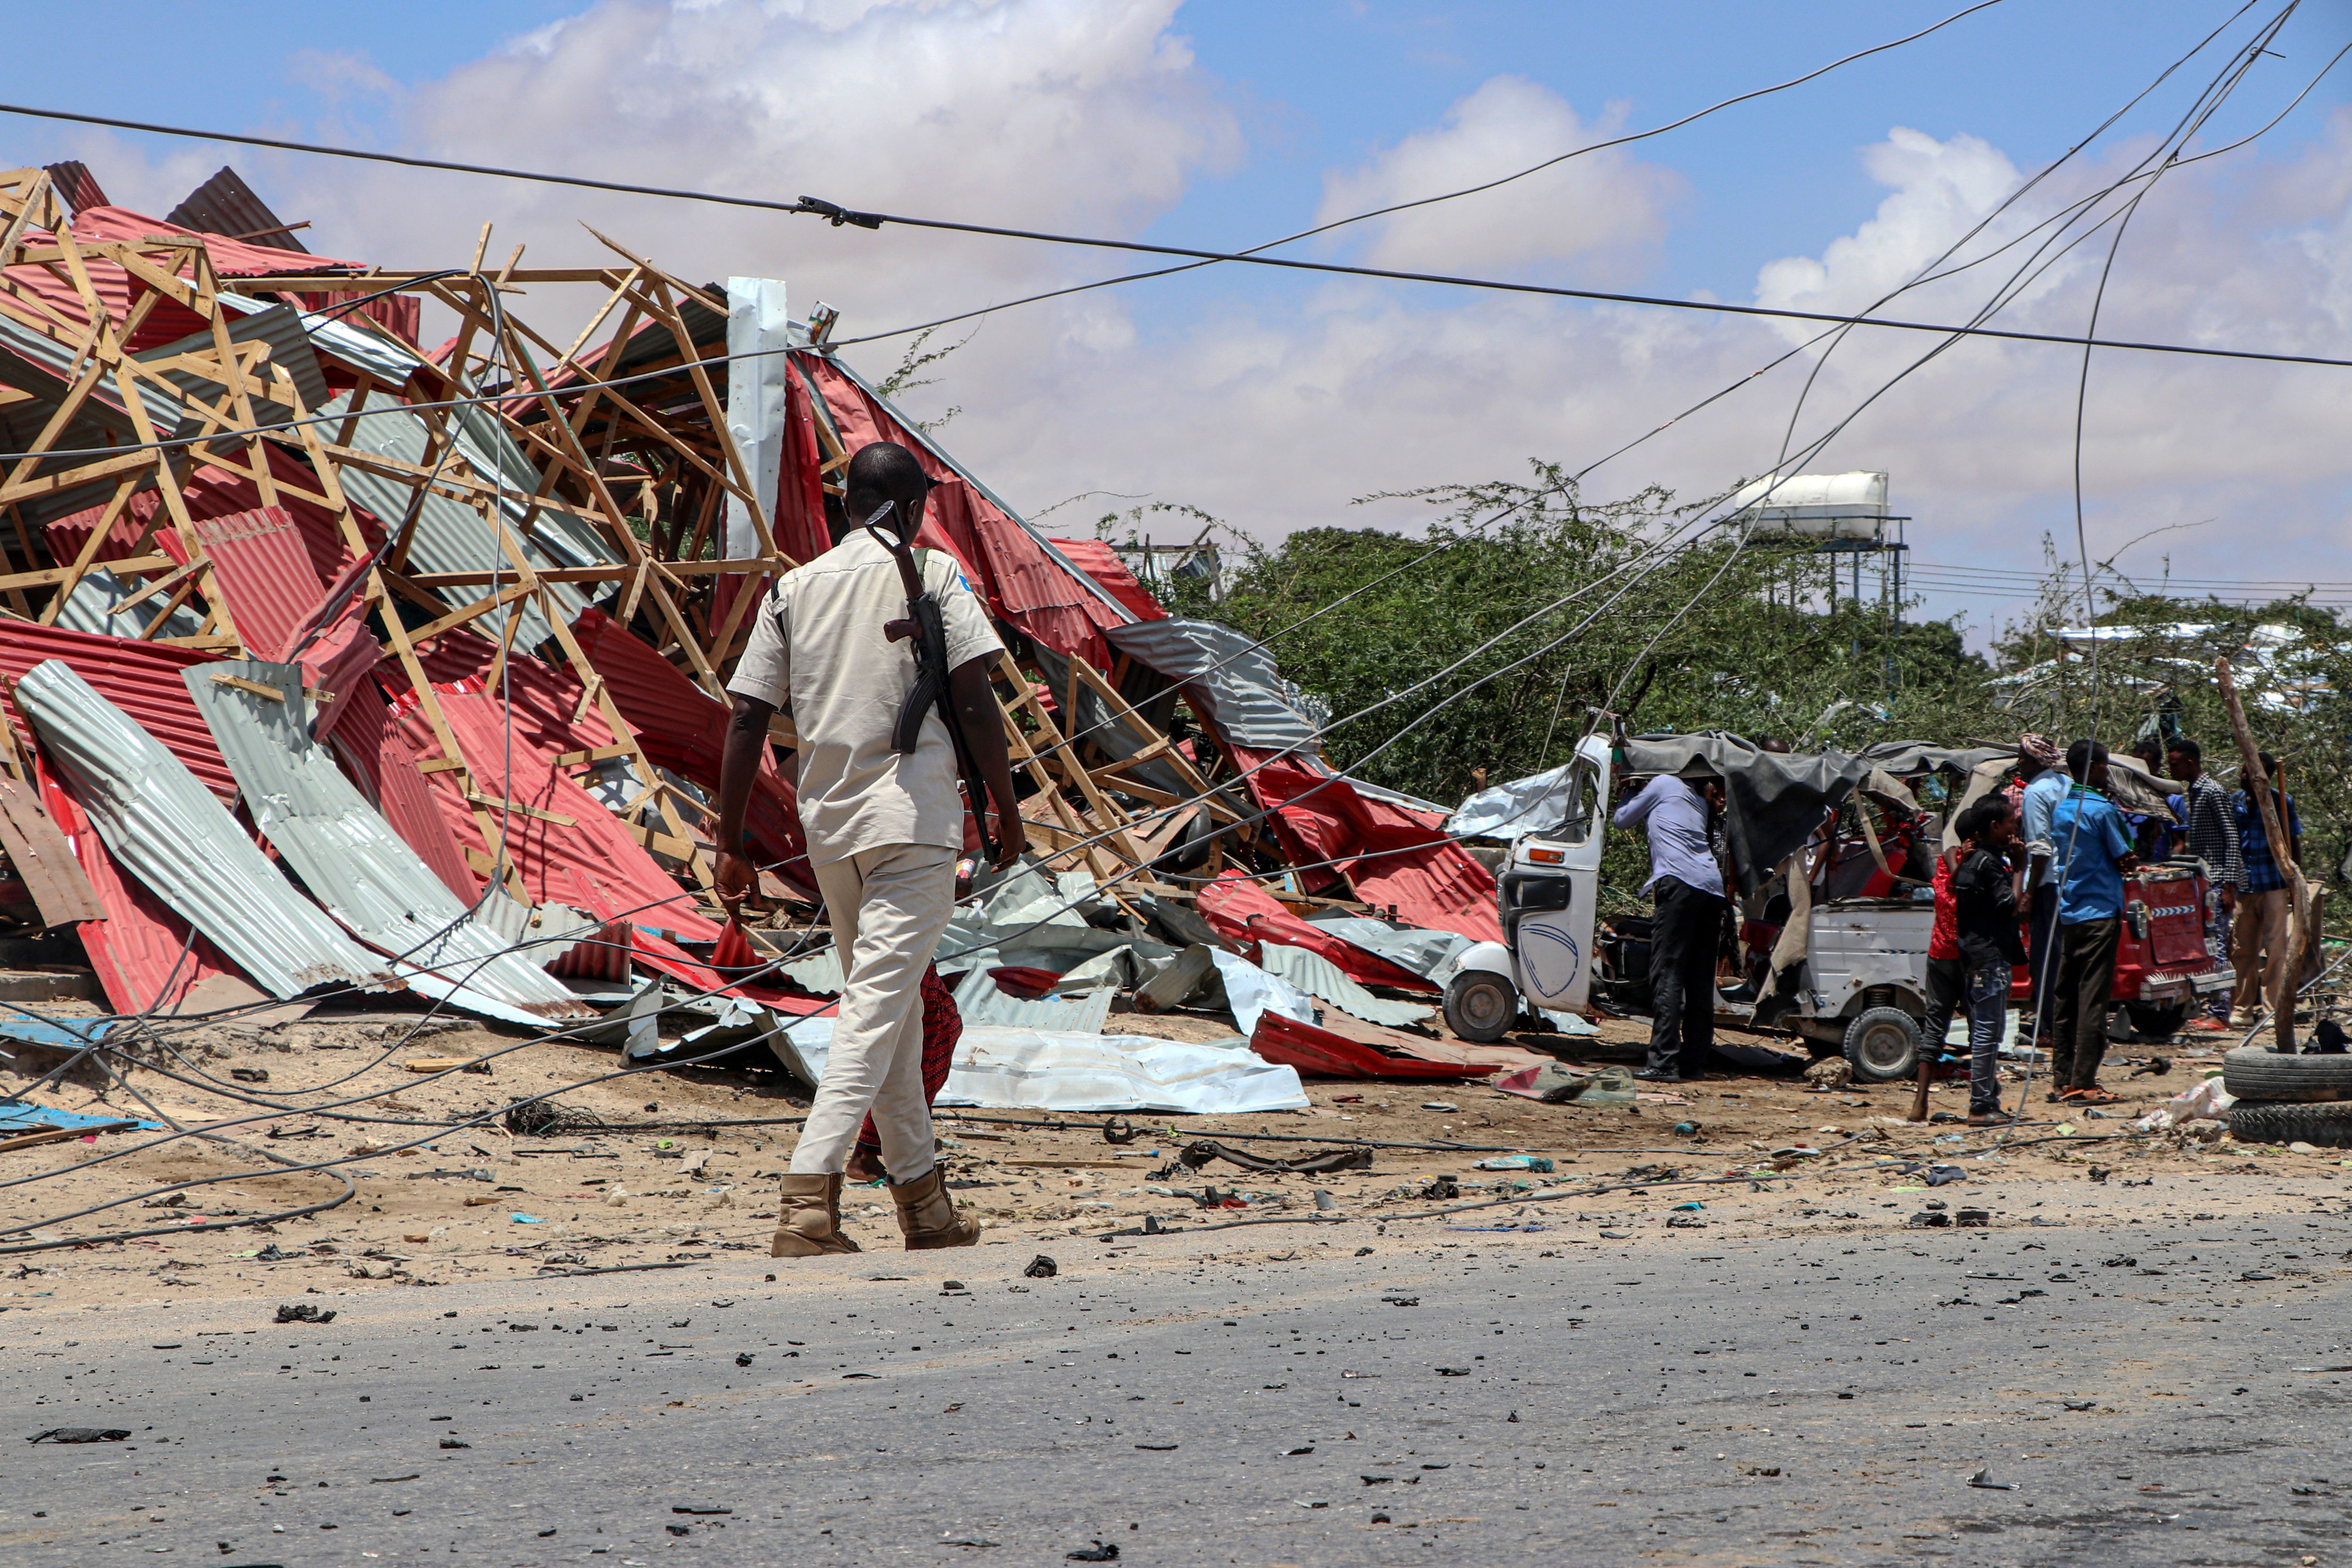 A Somali police officer patrols as bystanders gather at the site of a suicide car bomb explosion that targeted a European Union vehicle convoy in 2019